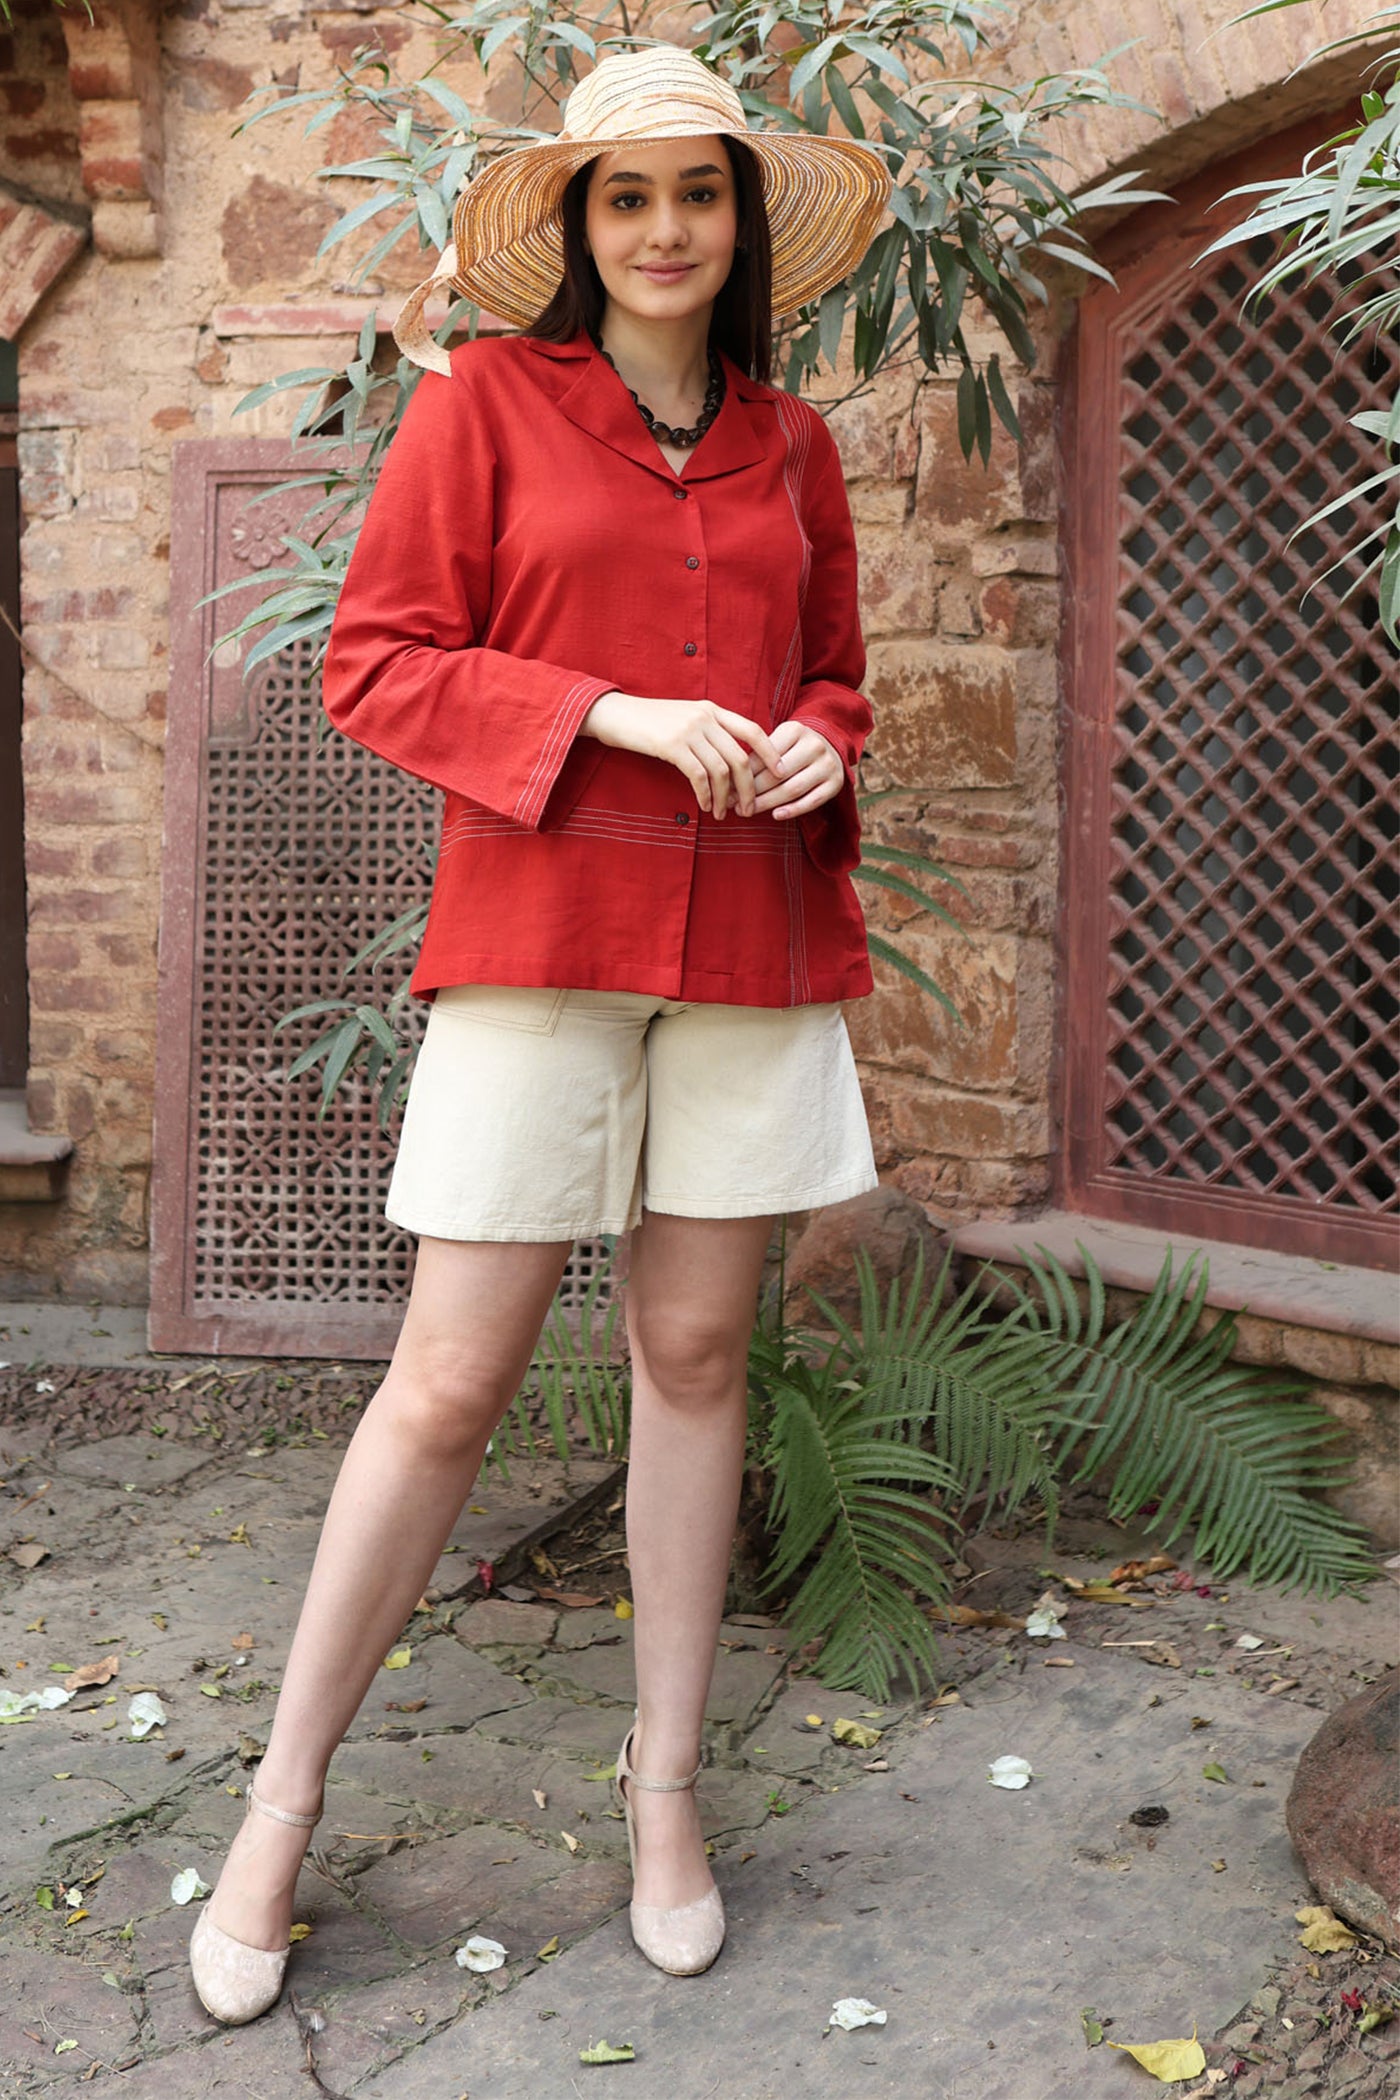 Dusty-Red Handloom Pure Linen-Cotton Collared Front-Open Short Blouse With Thereadwork-Detail